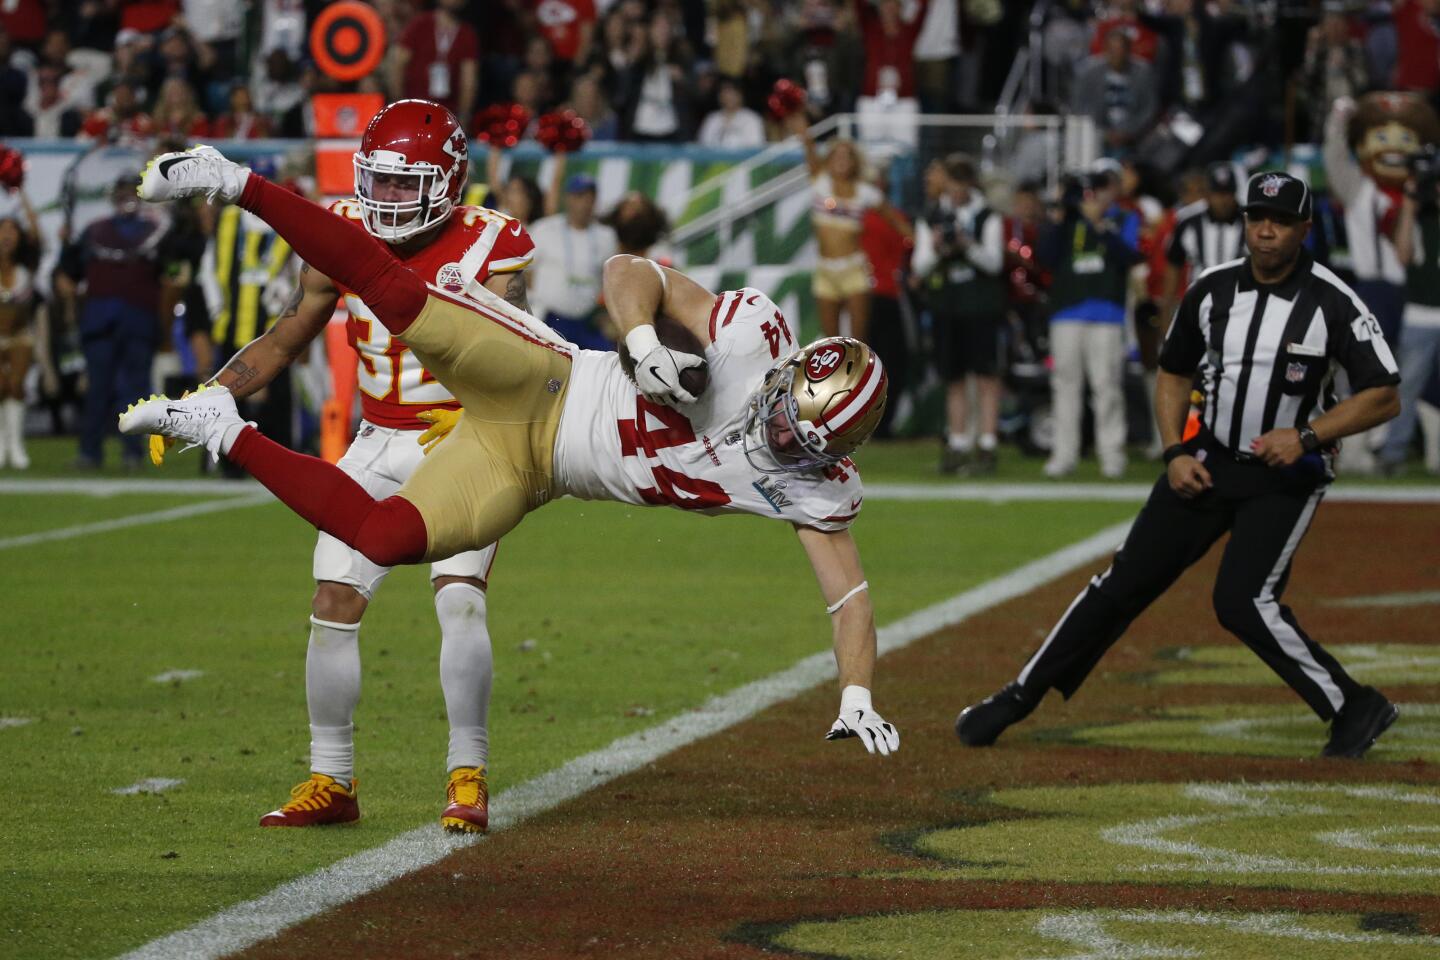 Super Bowl 2020 live updates: Score, Chiefs vs. 49ers play-by-play